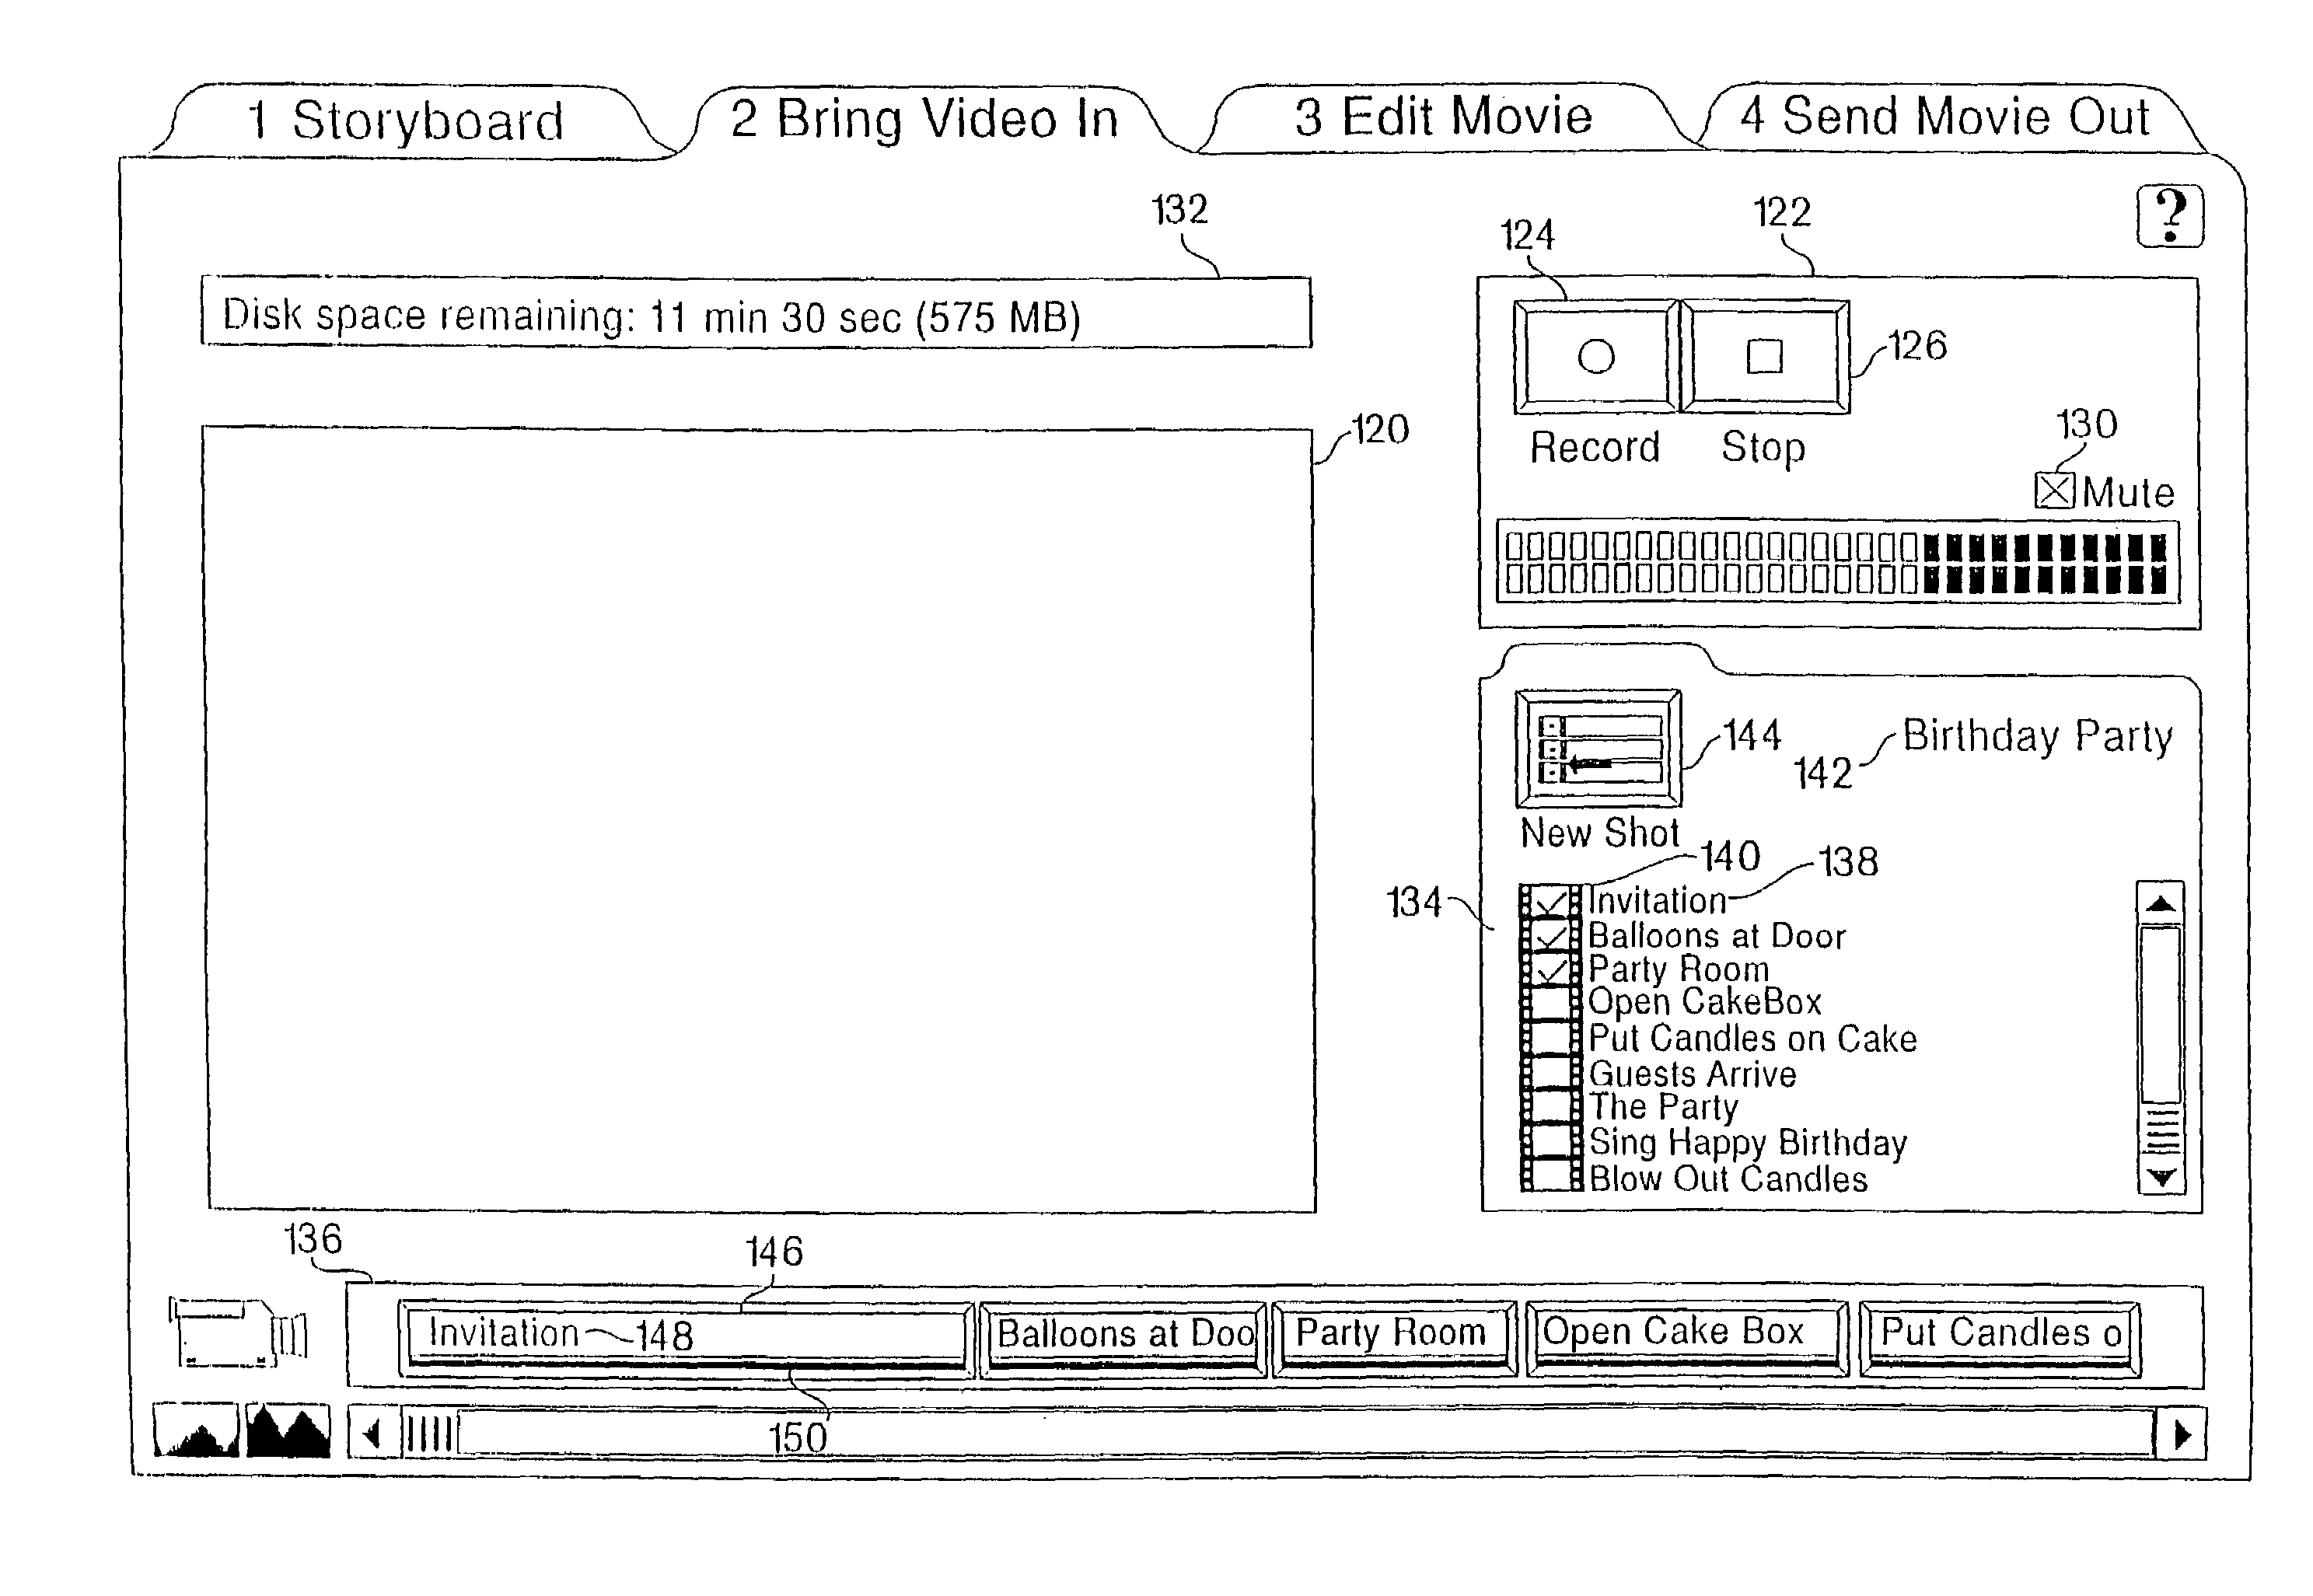 Graphical user interface for a motion video planning and editing system for a computer